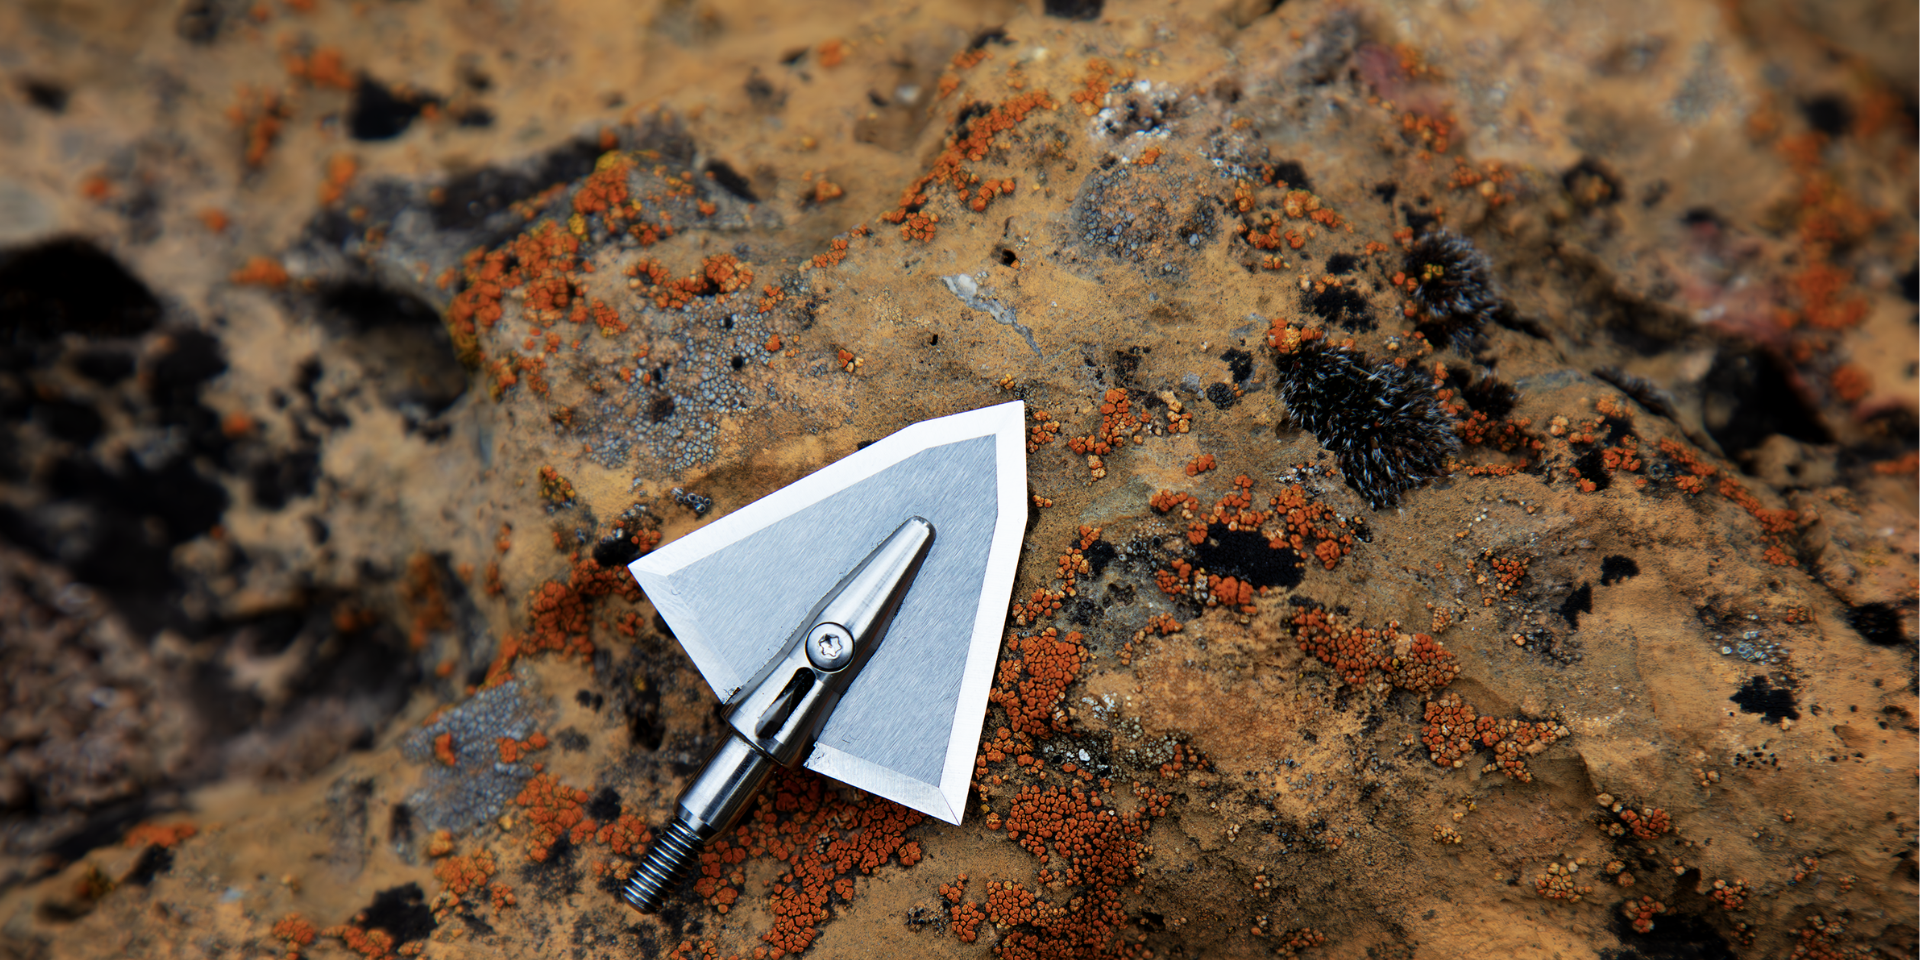 wide broadhead over top of rock with moss on it